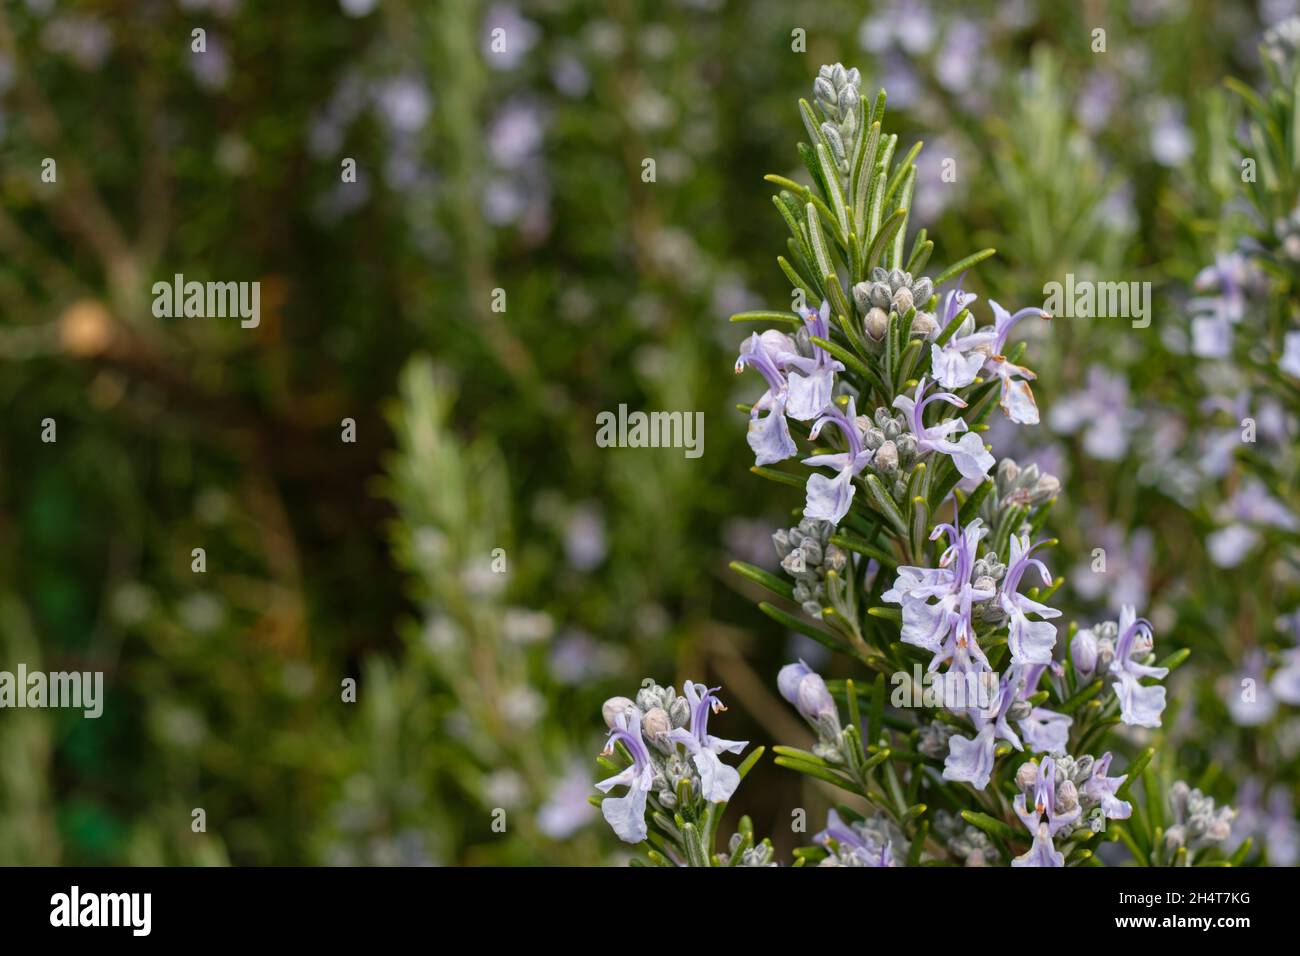 Flowers of rosemary (Rosmarinus officinalis) in the blurred background Stock Photo